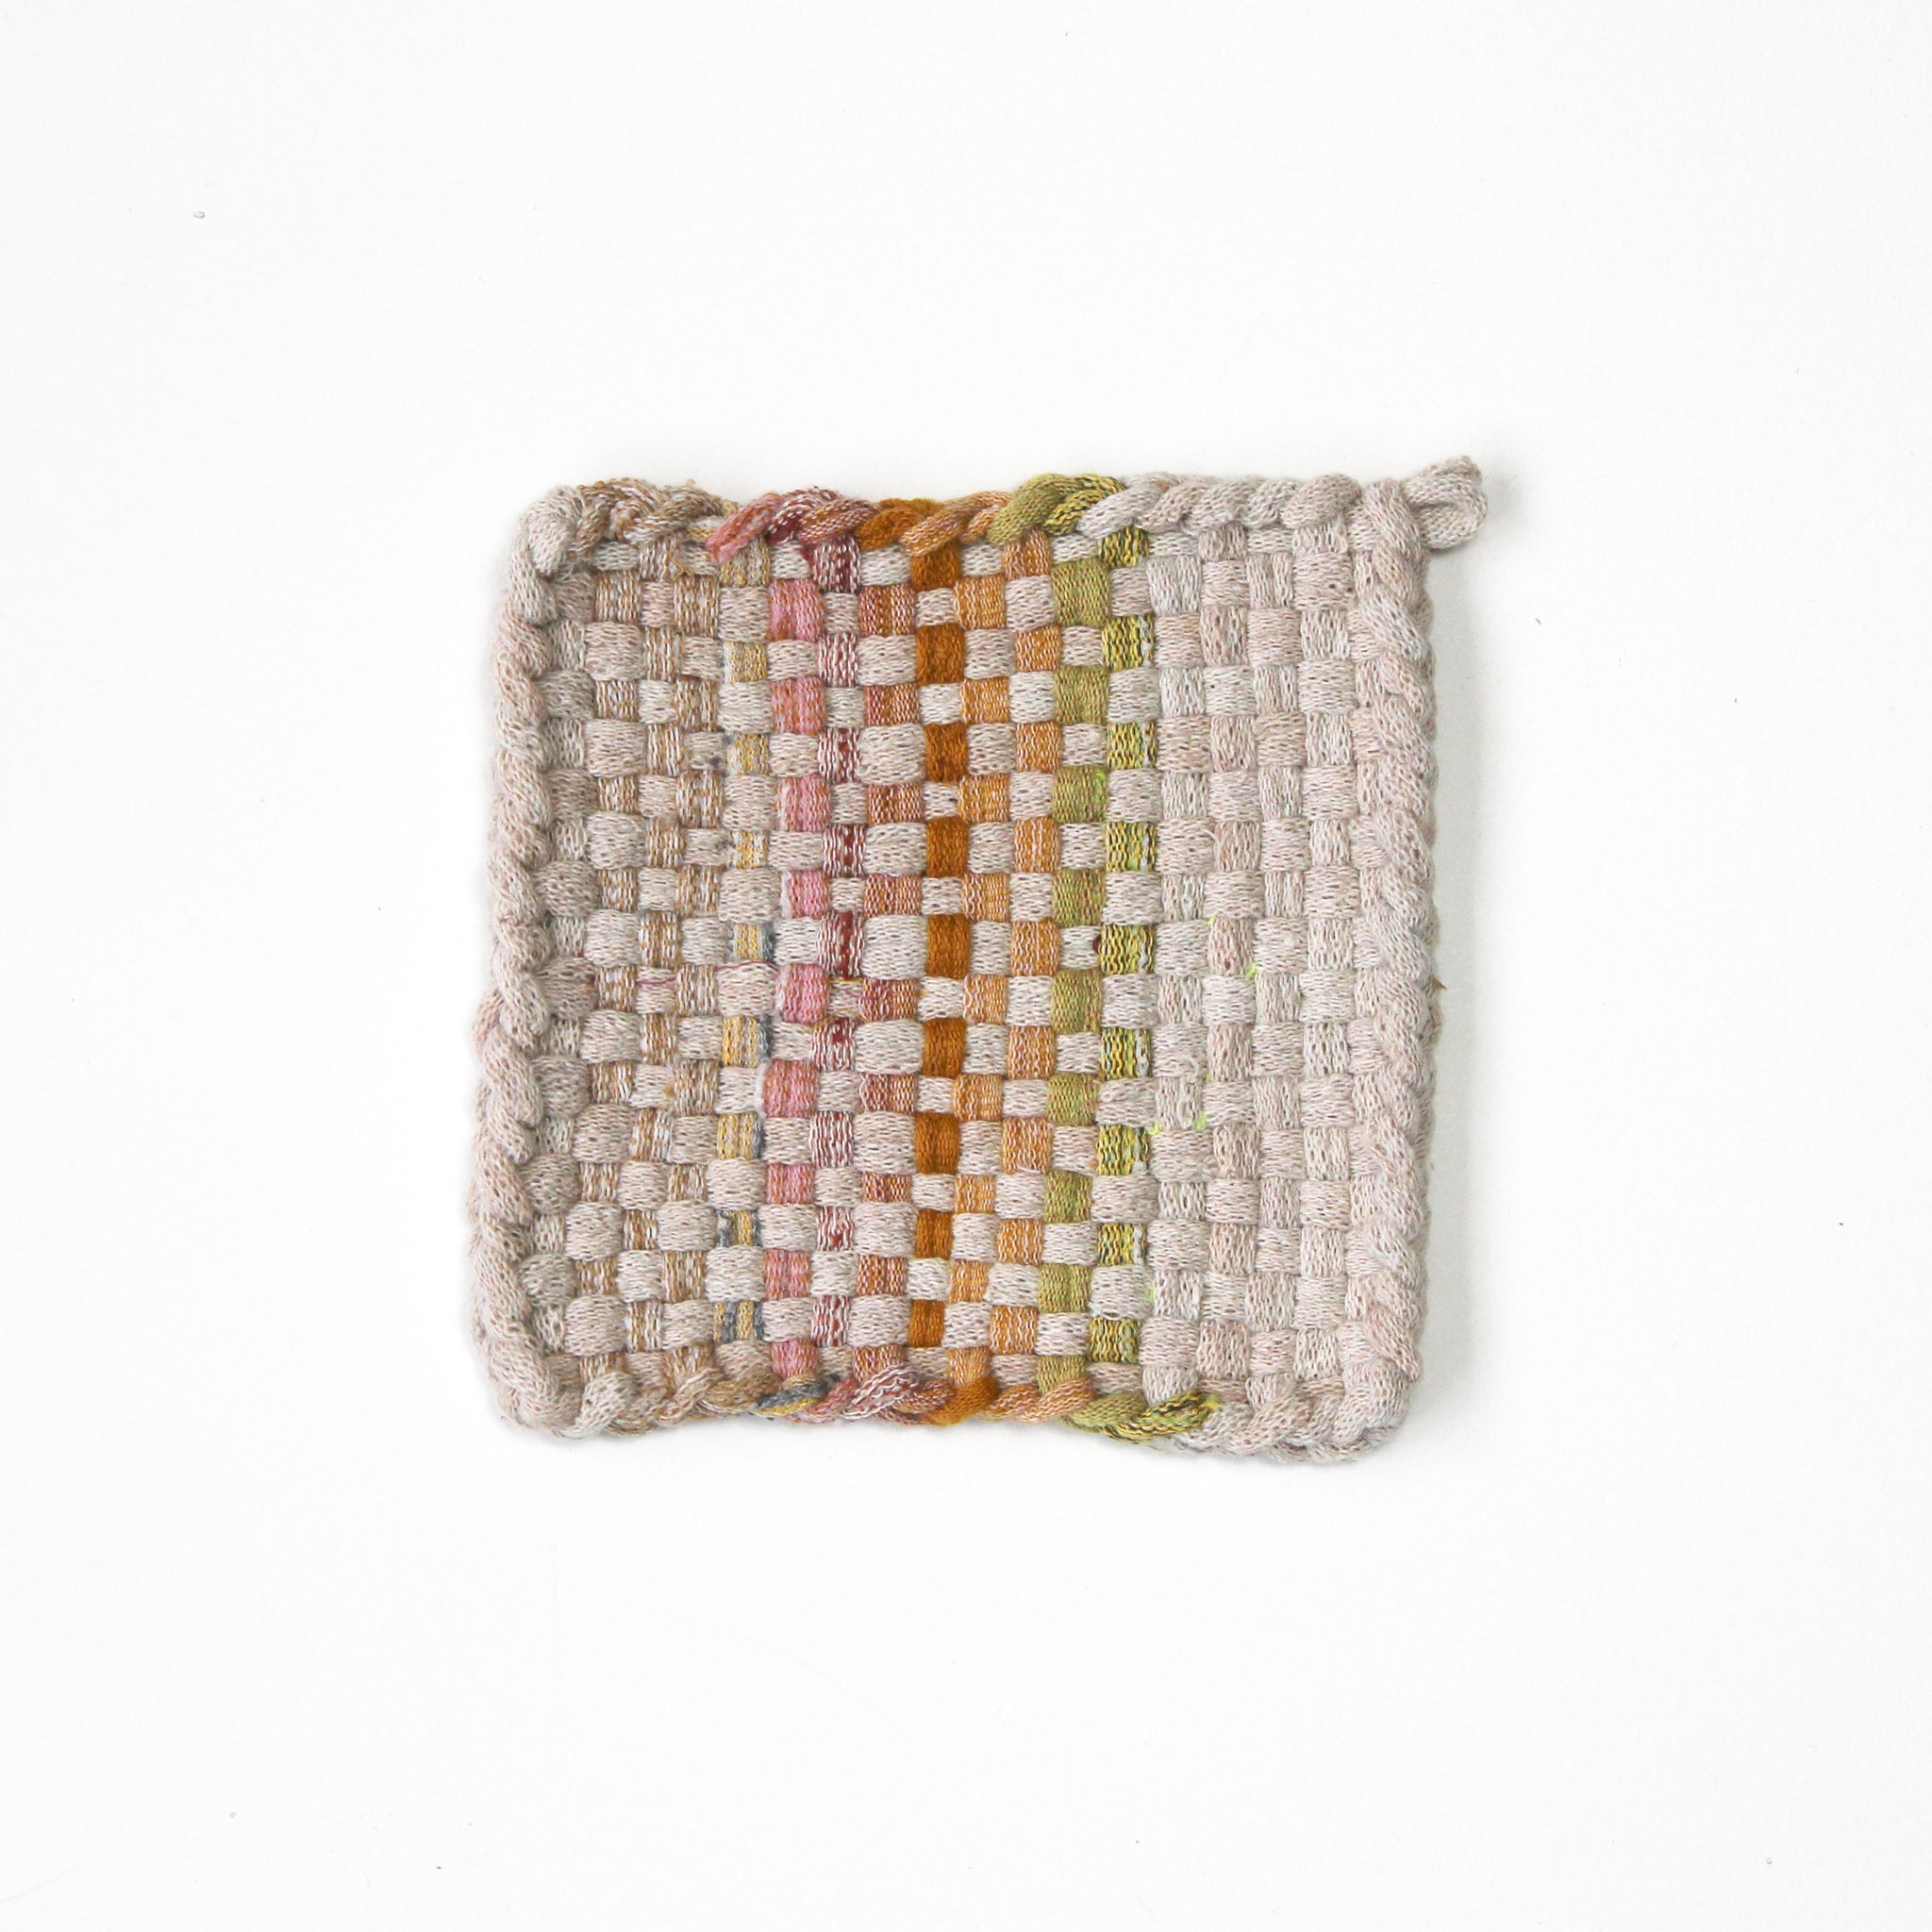 Handwoven Pot Holder - One of a Kind 3